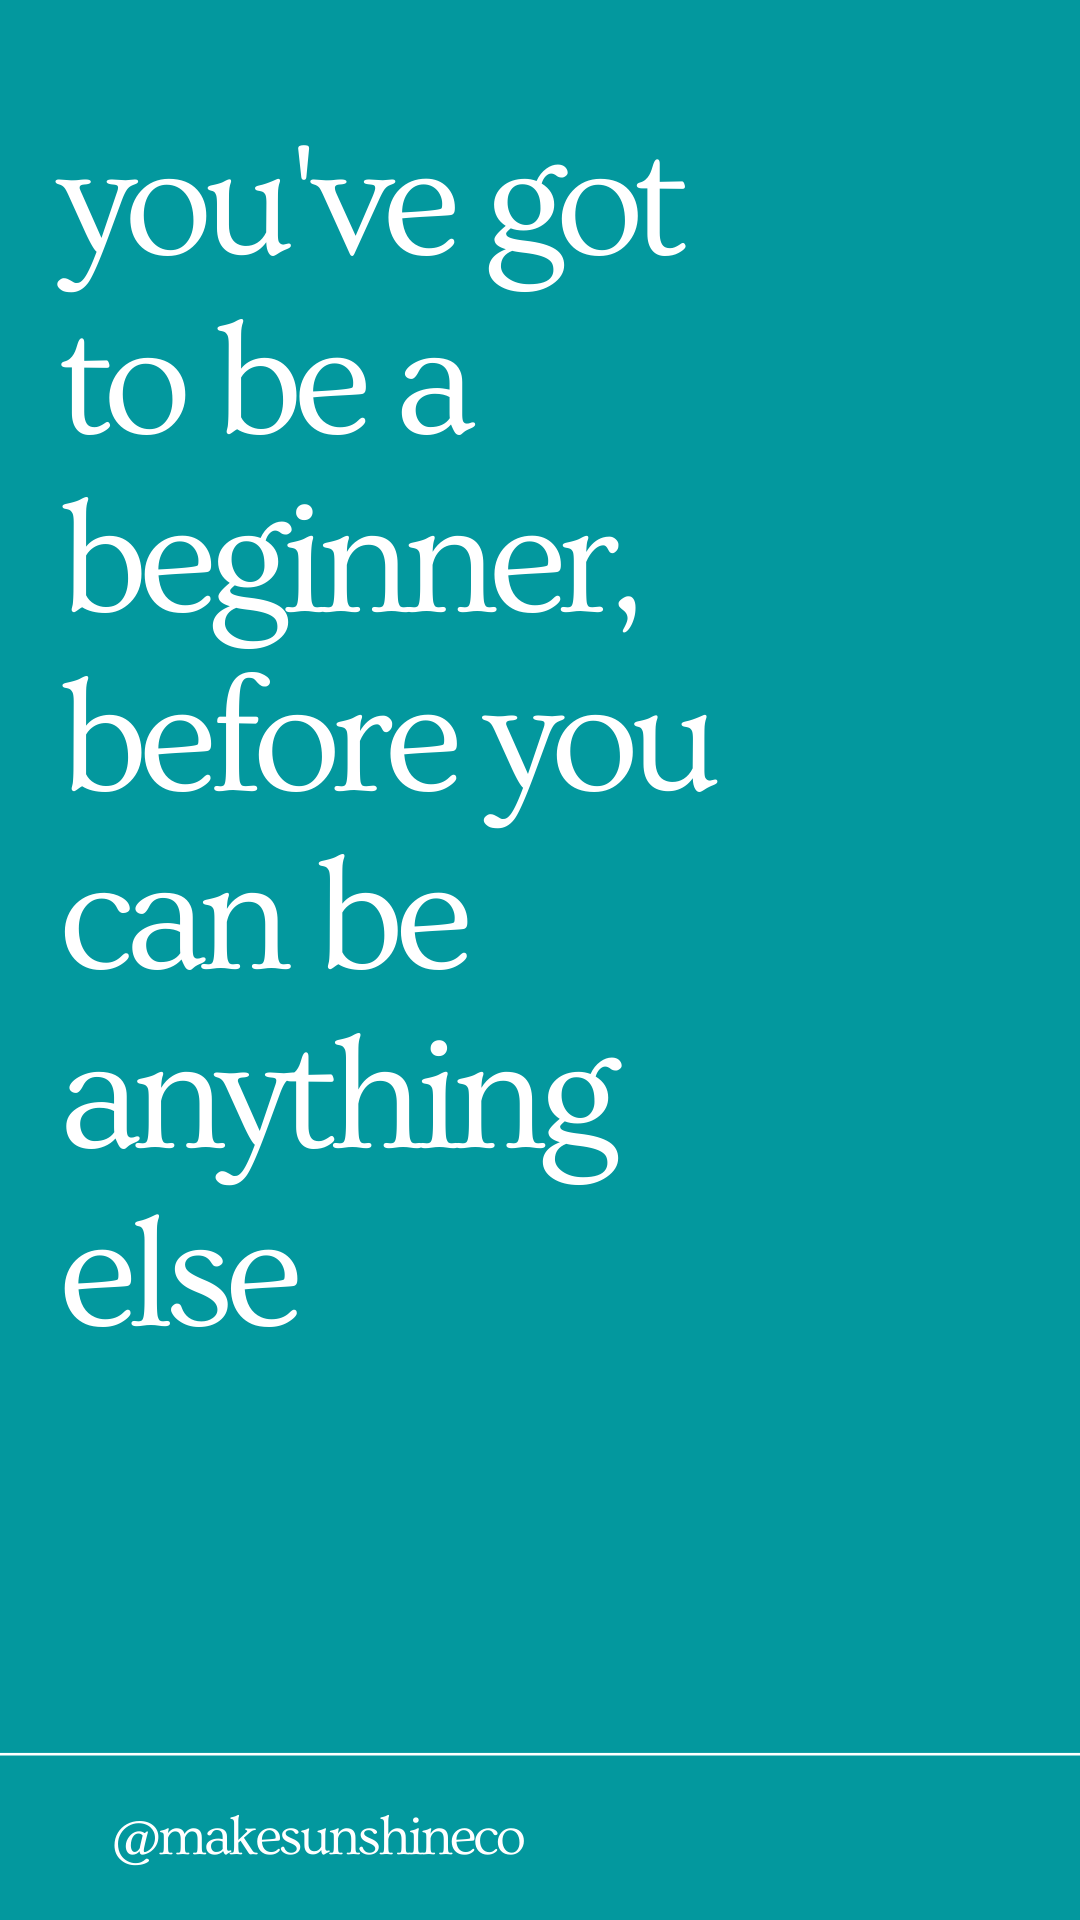 You’ve got to be a beginner before you can be anything else – The Growing Pains of Learning